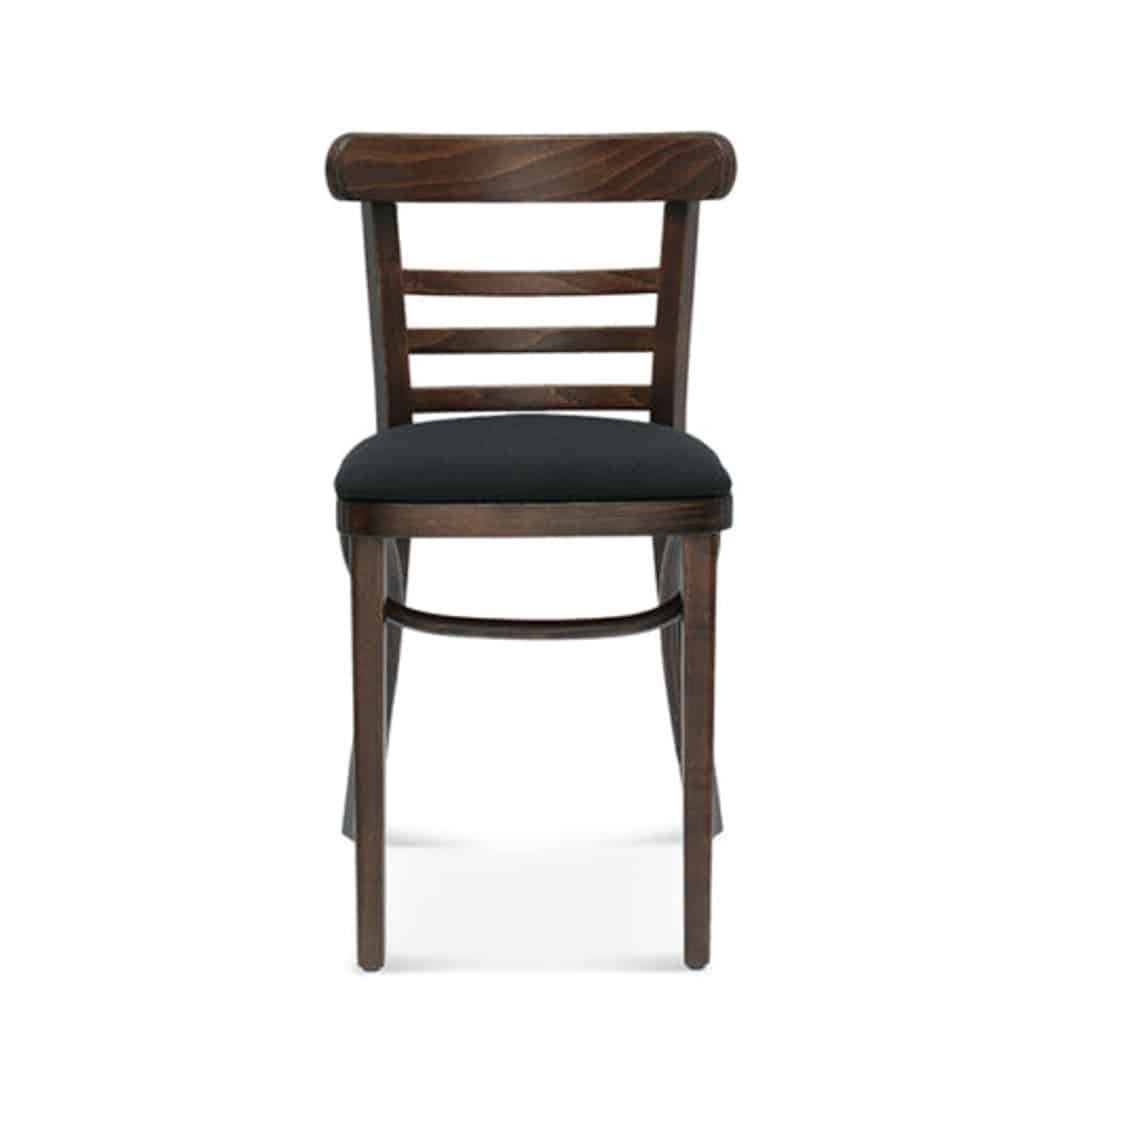 Charlie Classic Wood Chair Slatted Back Pub Restaurant Chair Bentwood Front View